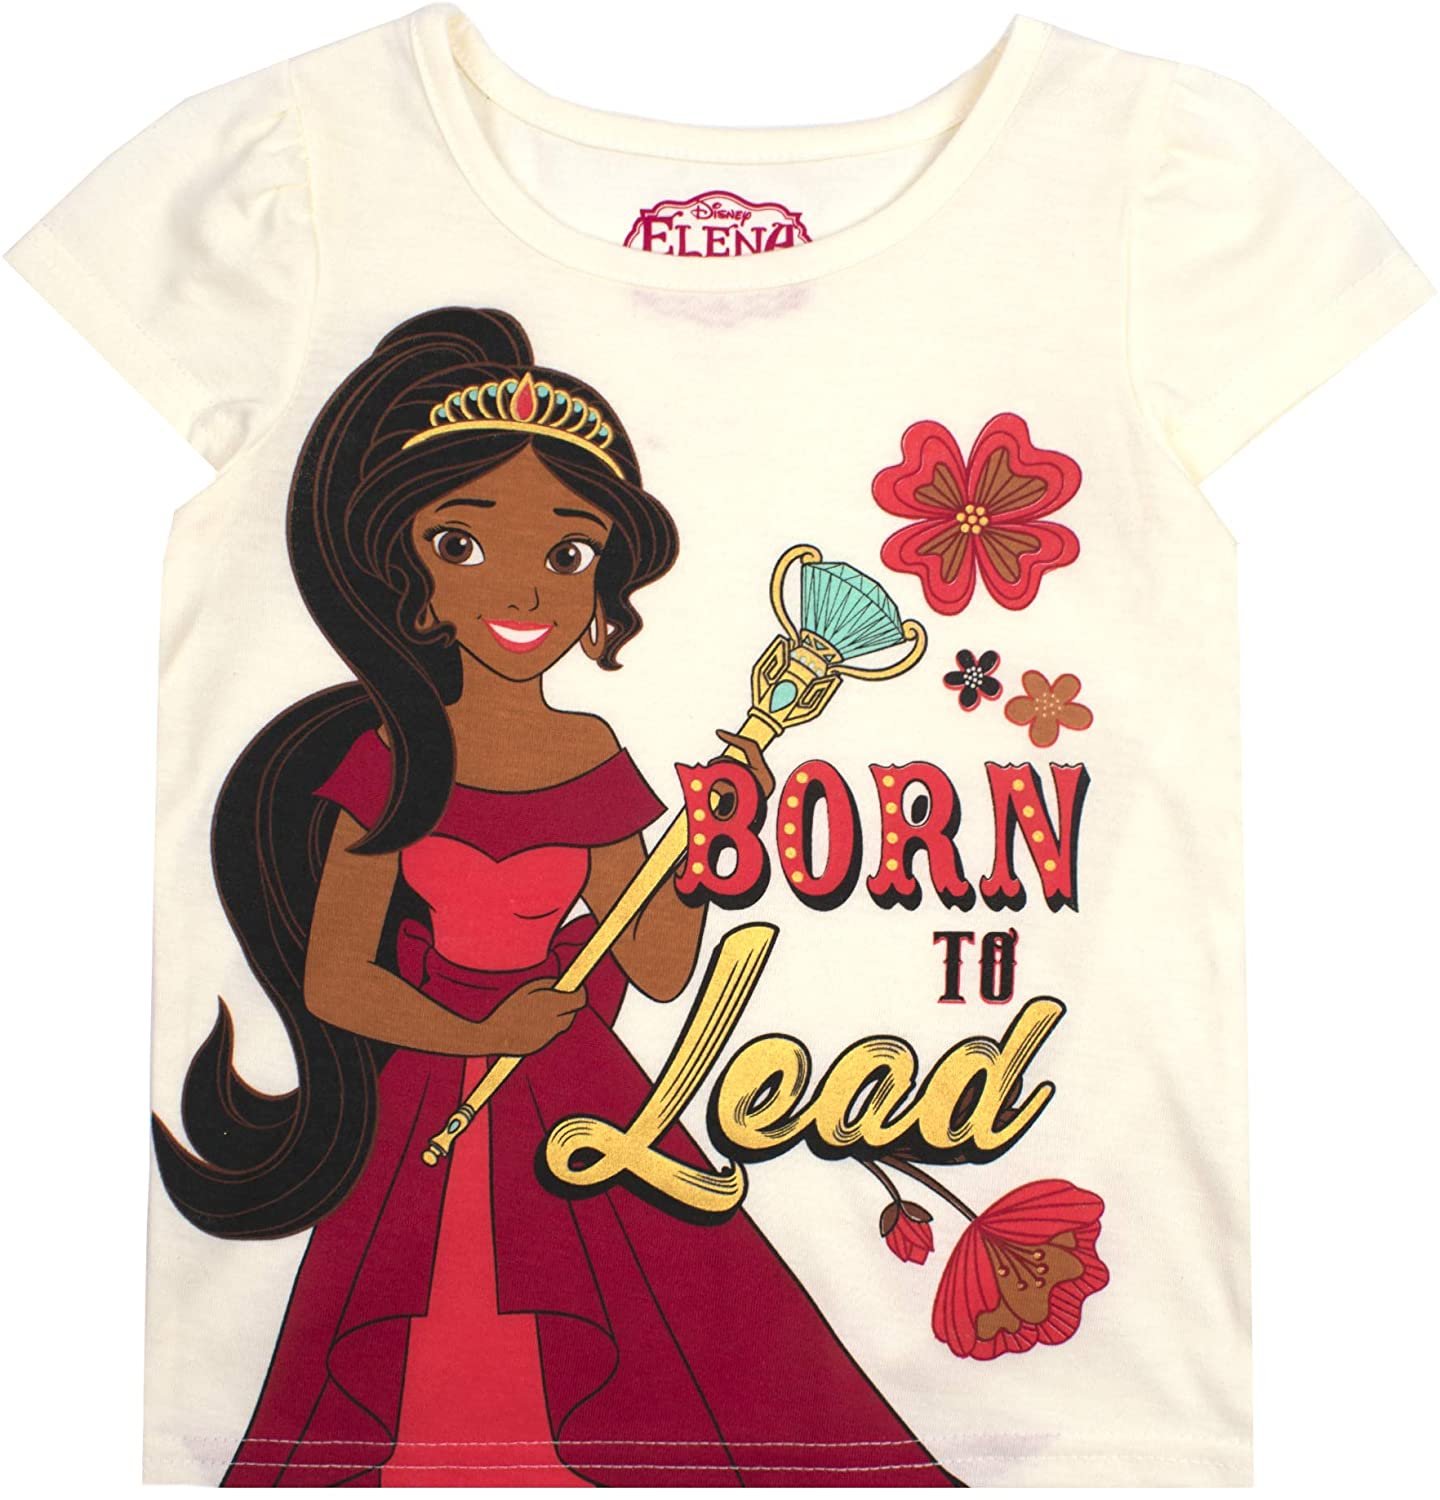 Disney Girls 3-Pack Short Sleeve T-Shirts, Casual Clothing for Toddlers and Kids - Elena of Avalor - image 3 of 4